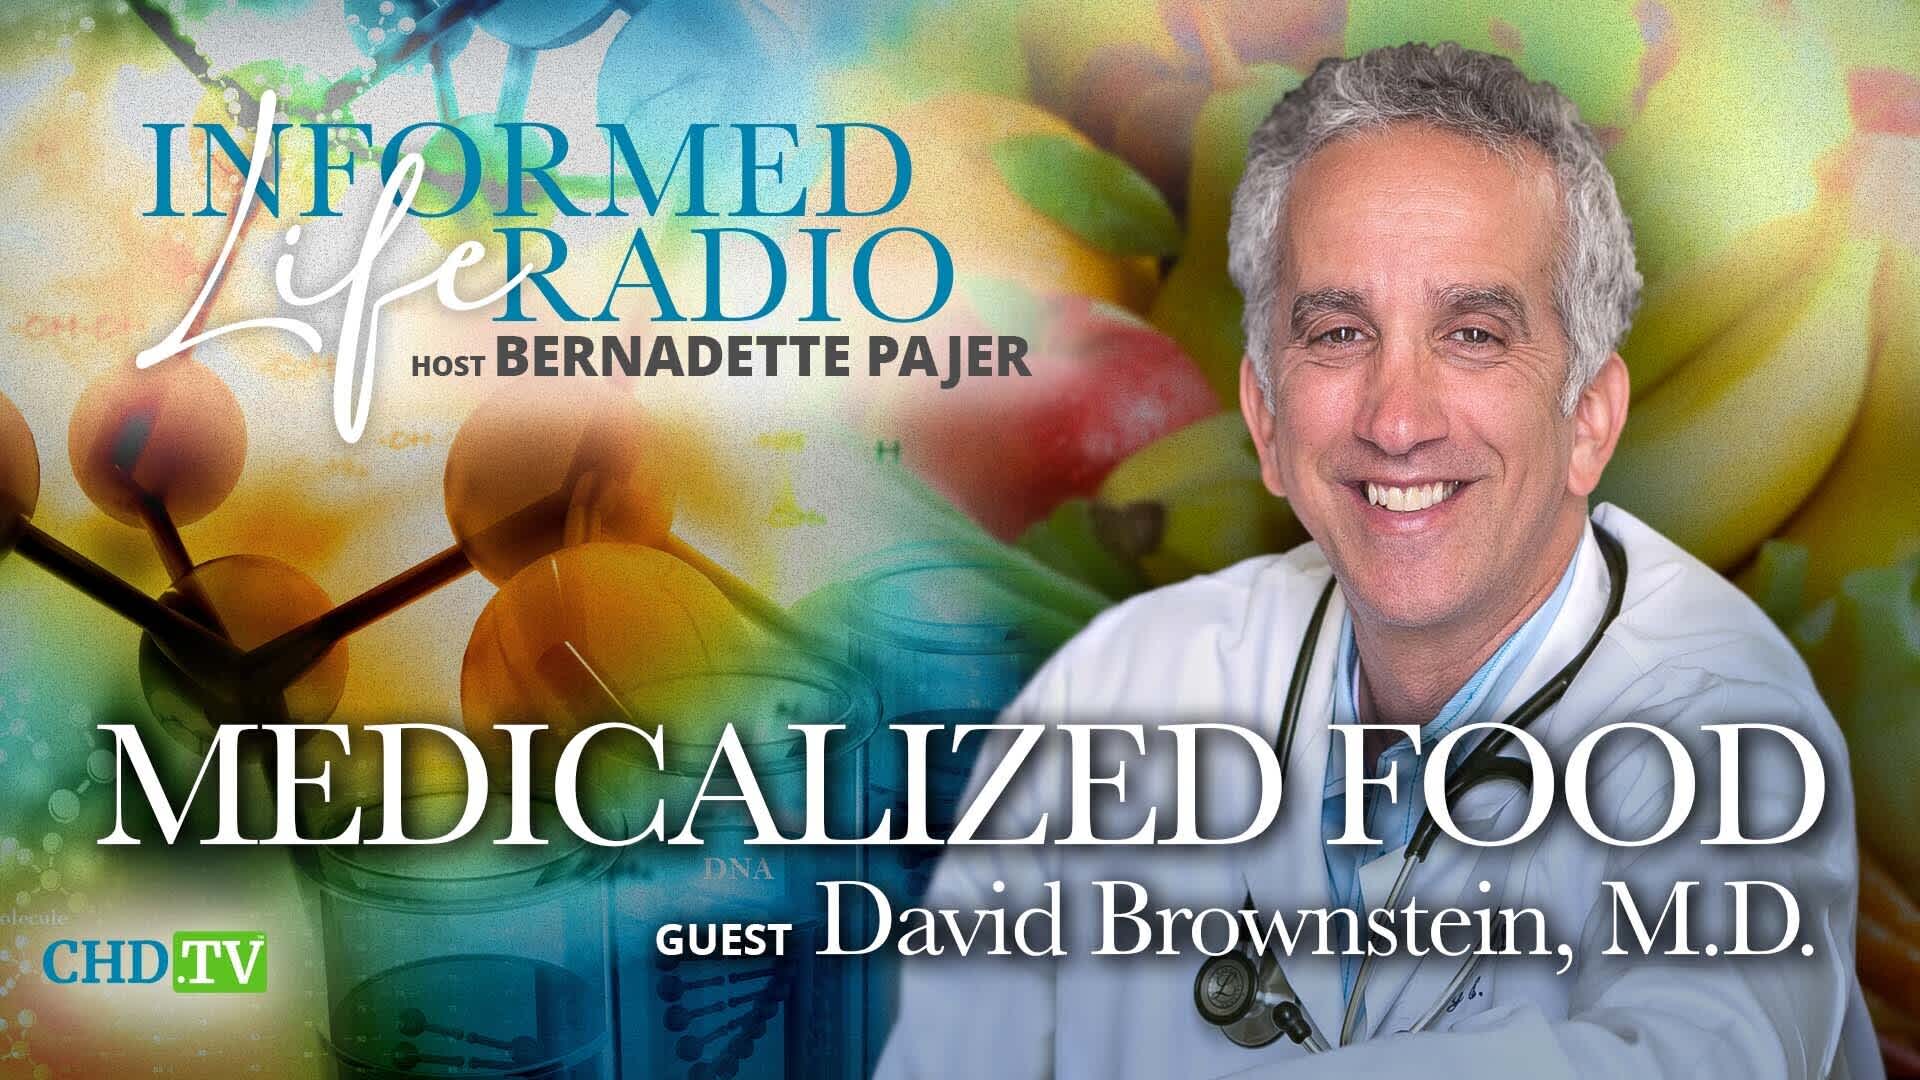 Medicalized Food With David Brownstein, M.D.